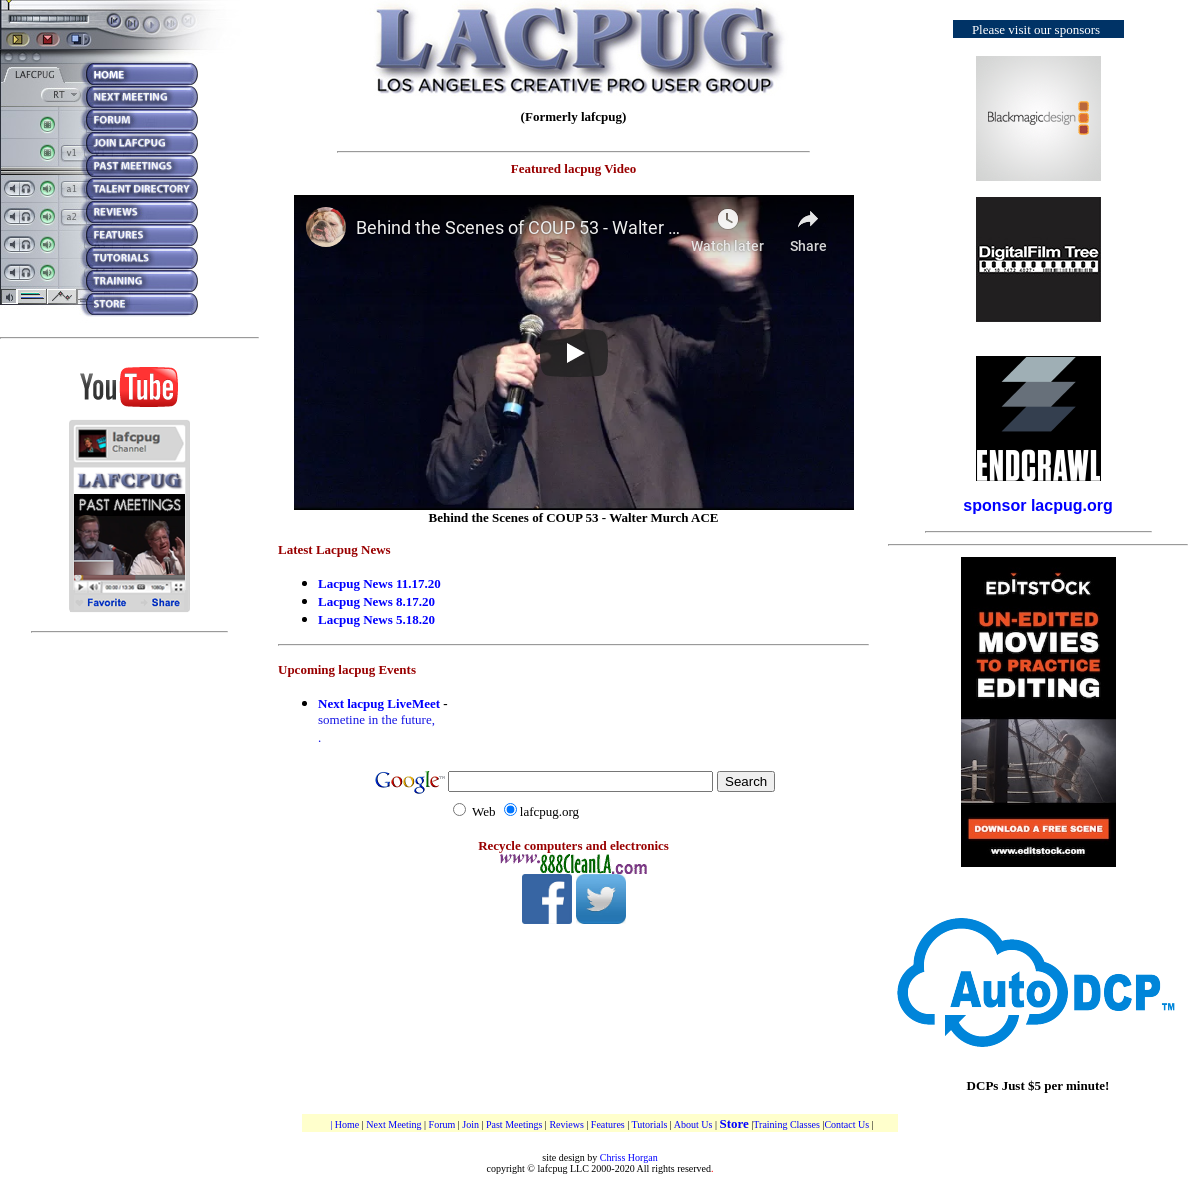 A complete backup of lafcpug.org